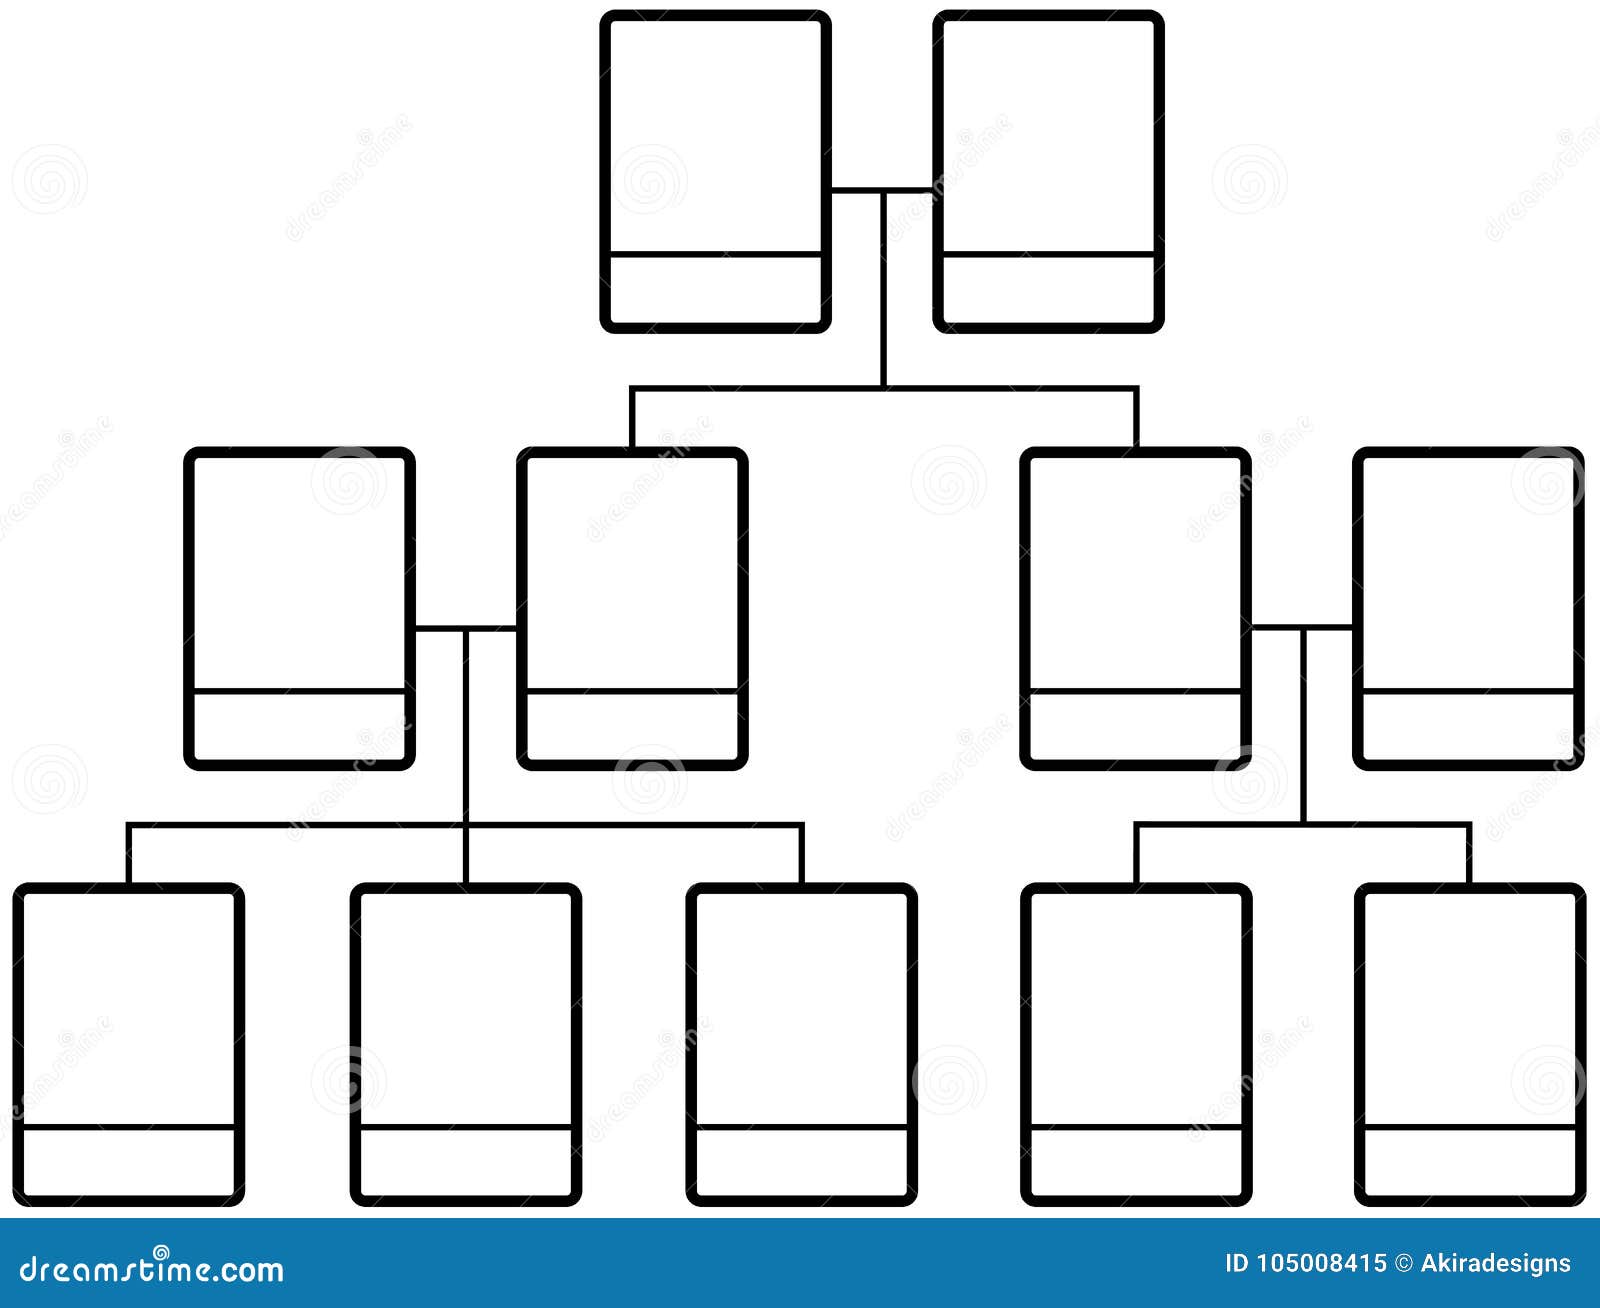 Family Tree Team Structure Blank Template Stock Vector For Blank Tree Diagram Template